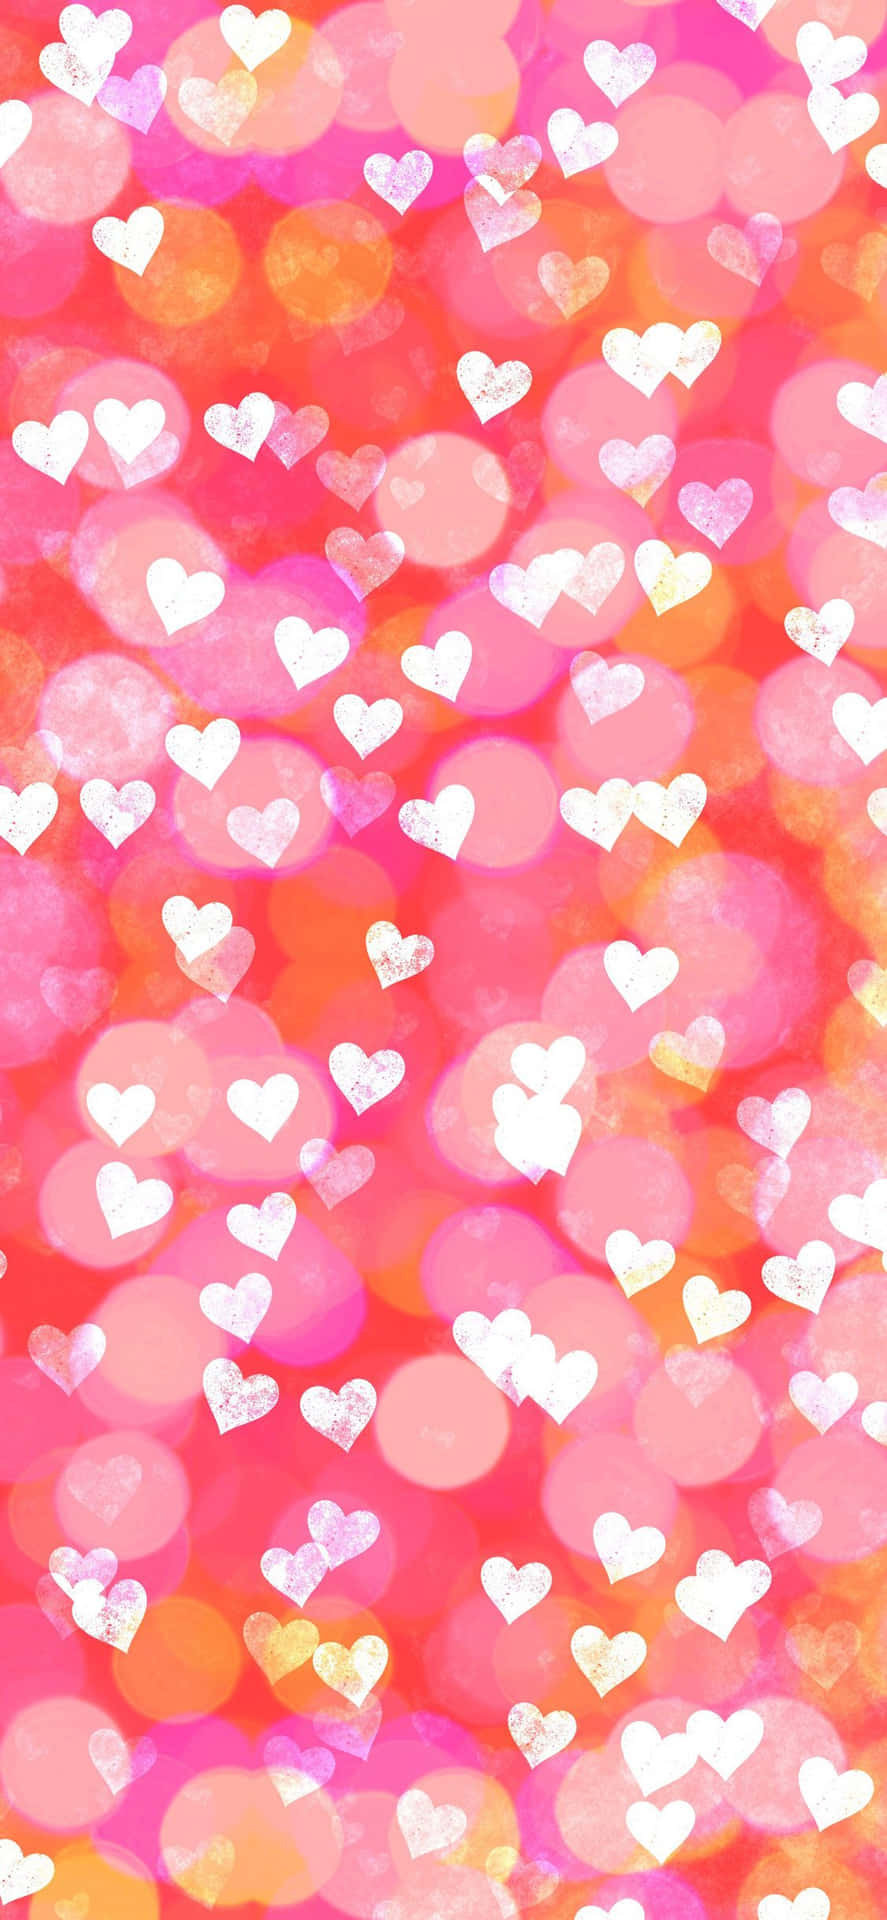 Orange And Pink Hearts Iphone Wallpaper